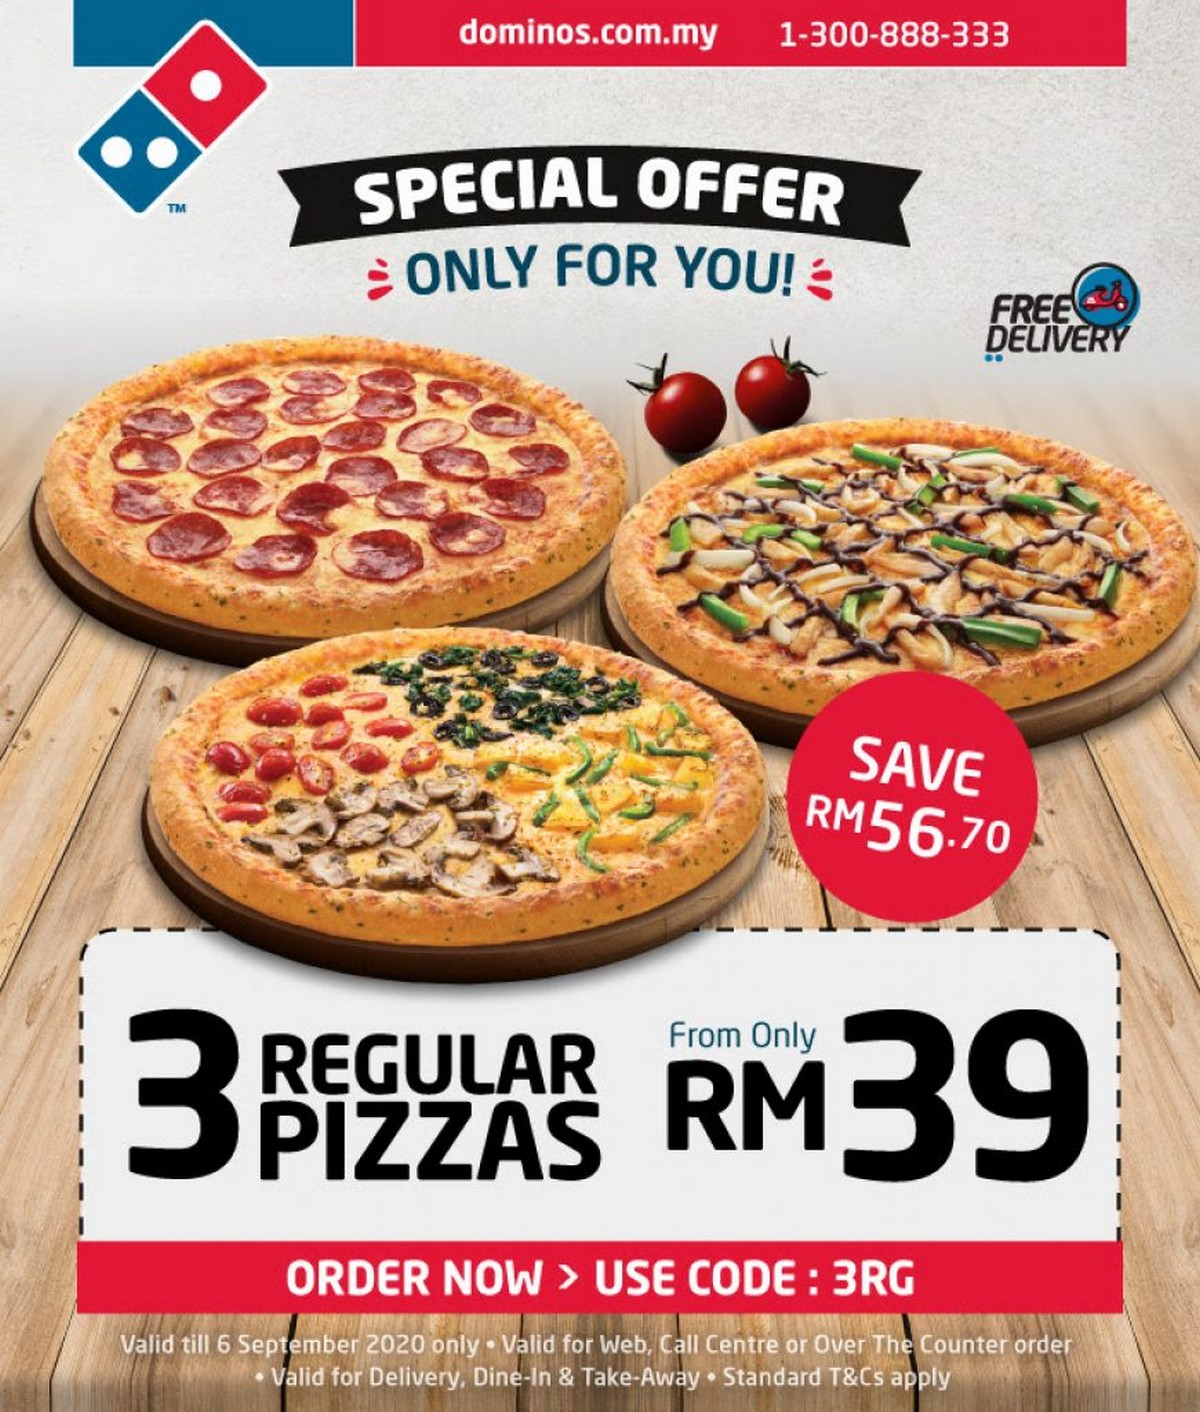 Domino's With Double Promo of 3 Regular Pizza For RM39 and ...